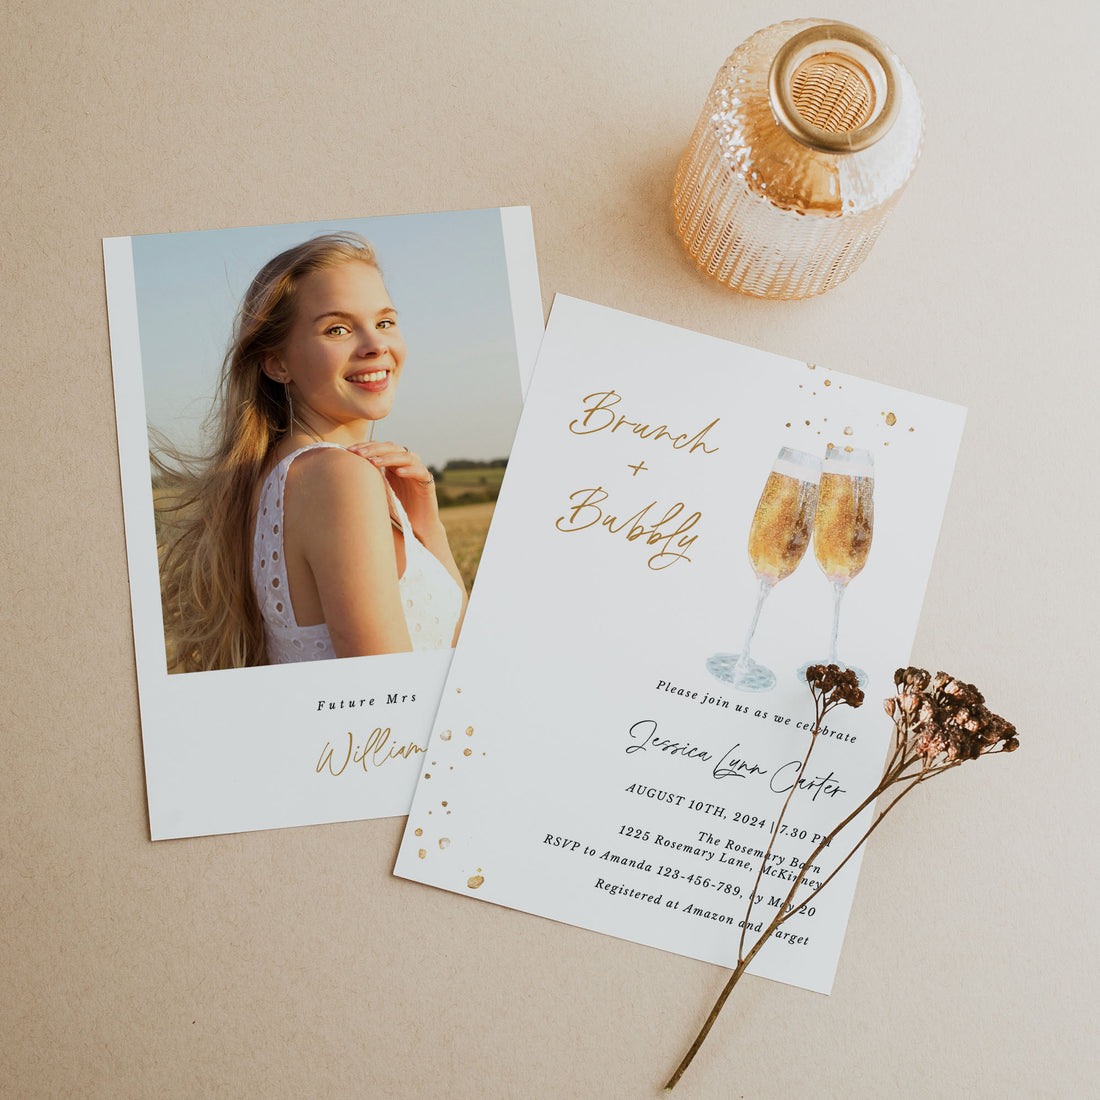 Brunch and Bubbly Invitation Template